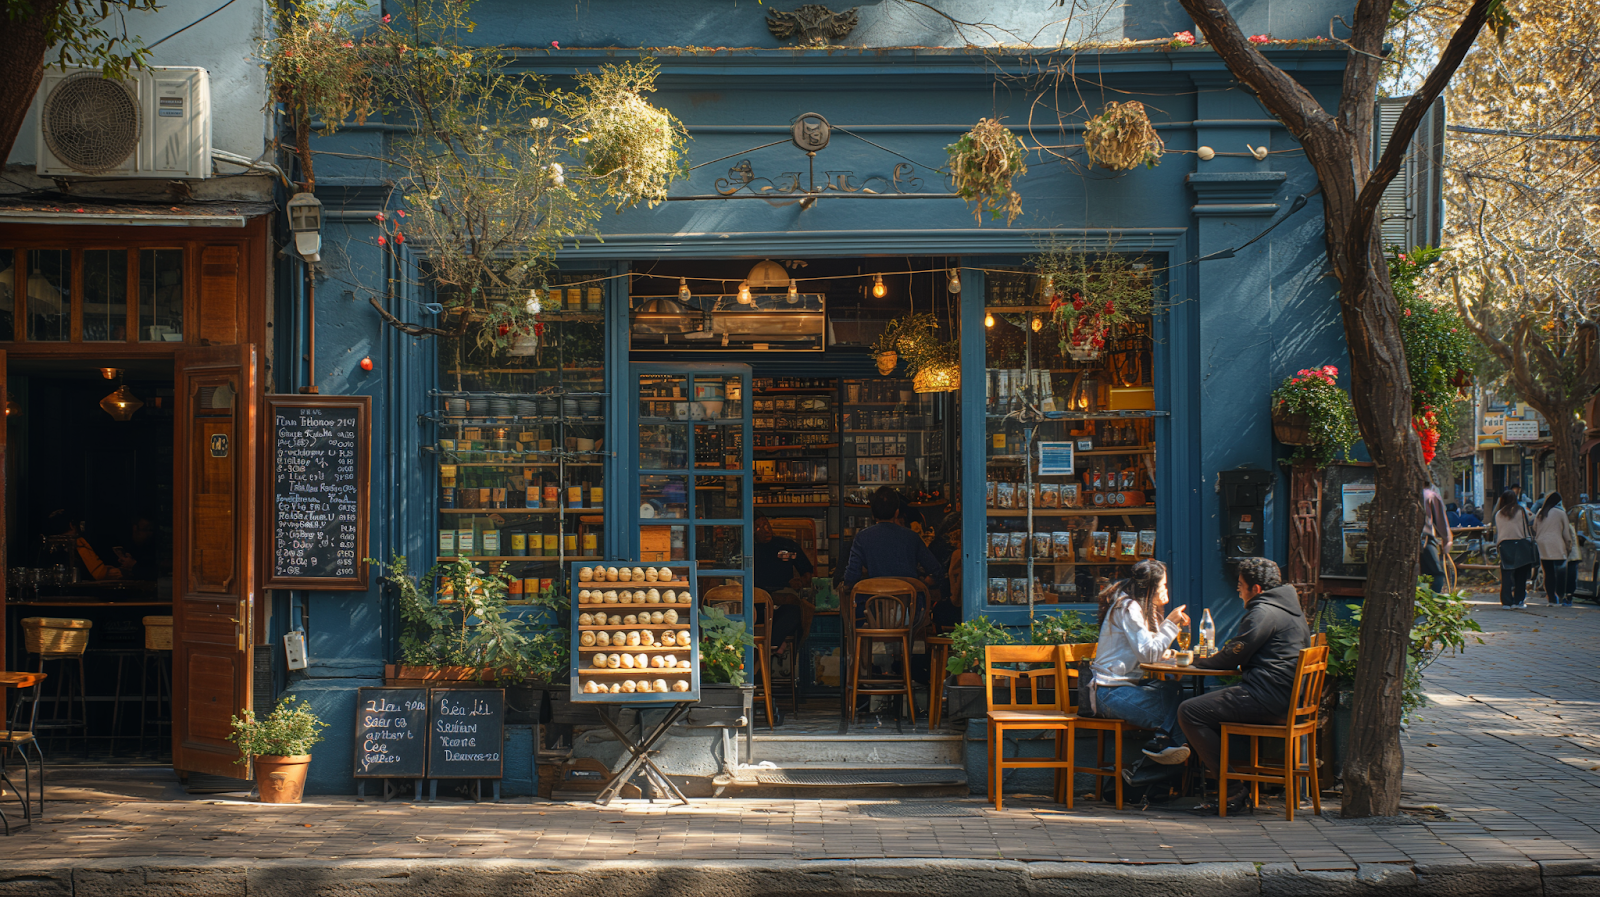 Patrons relaxing in a traditional Buenos Aires café, savoring coffee and local pastries.